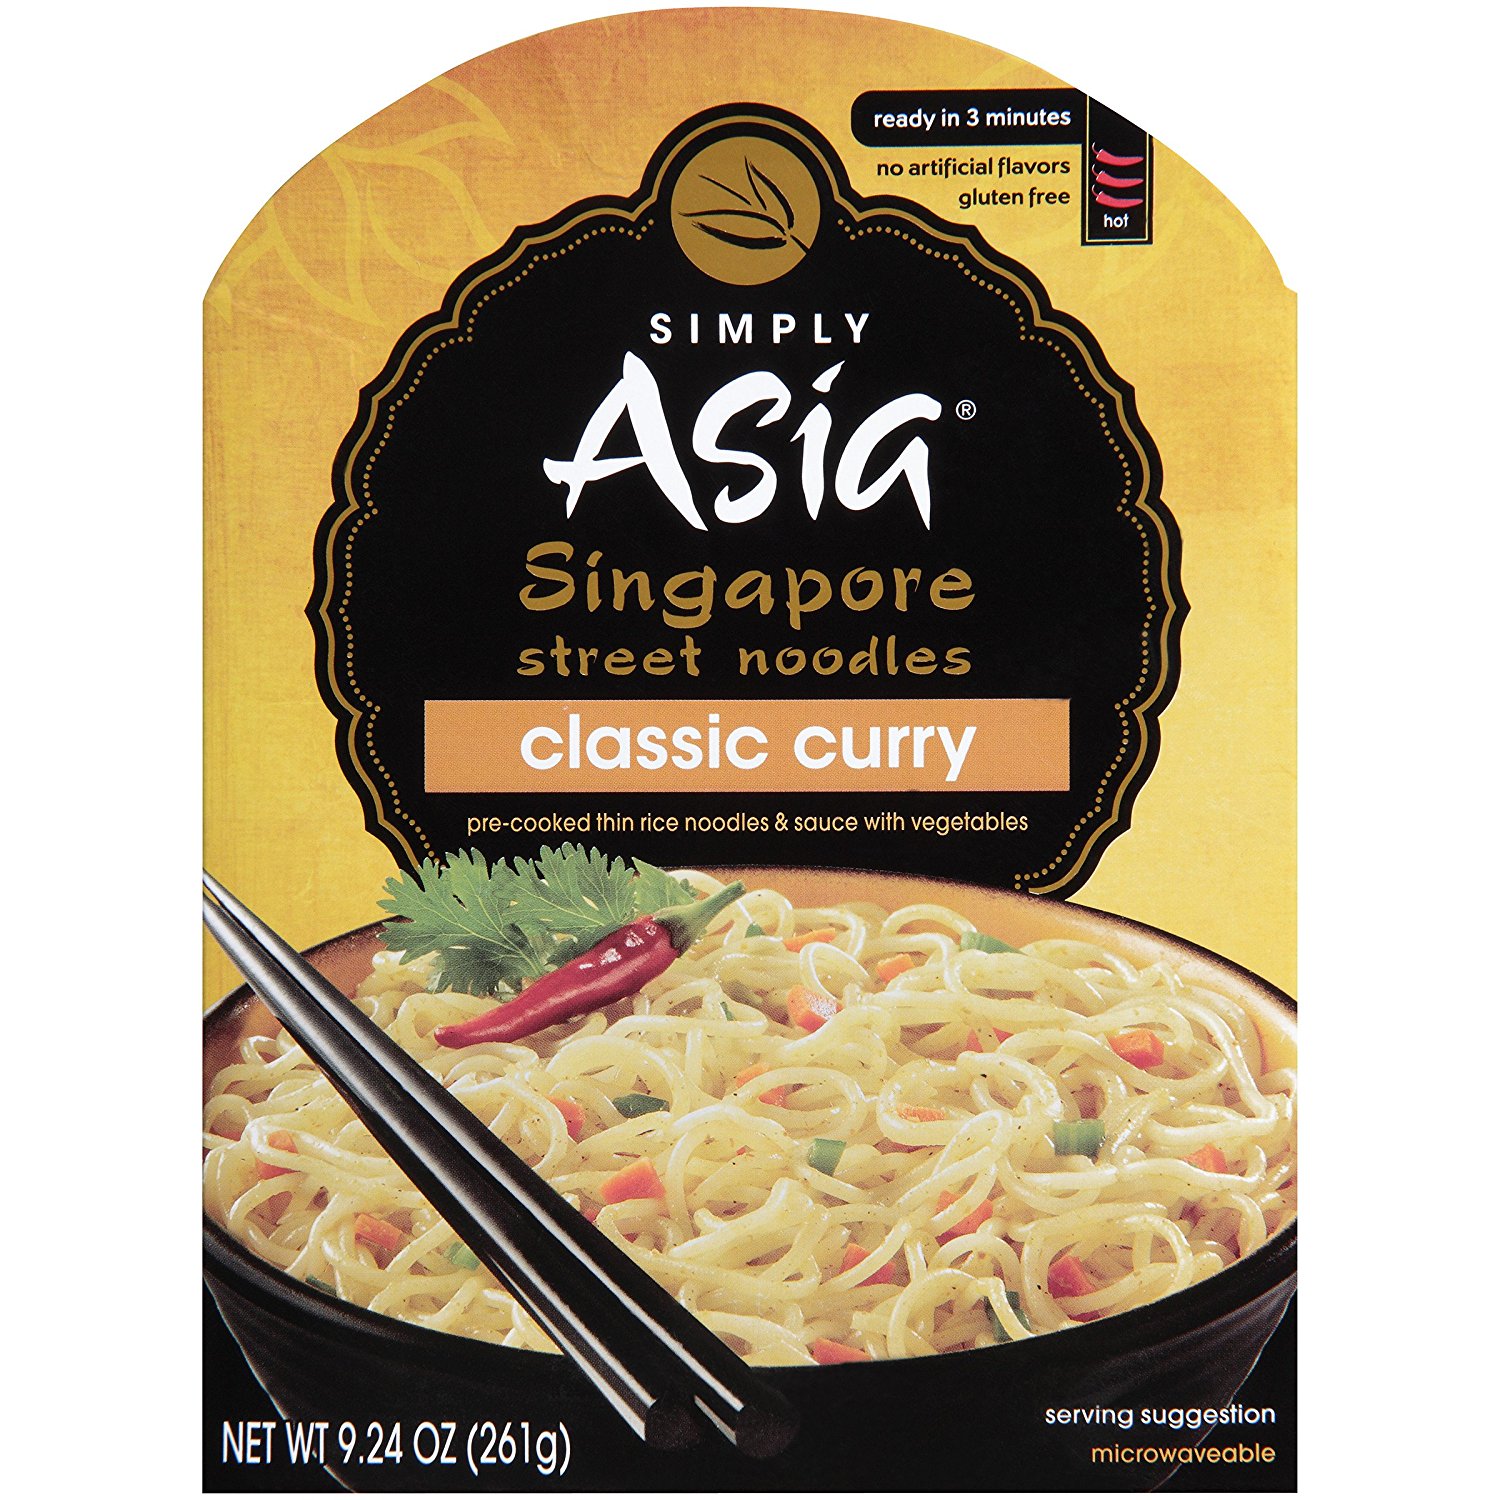 SIMPLY ASIA - SINGAPORE STREET NOODLES - GLUTEN FREE - CLASSIC CURRY - 9.24oz